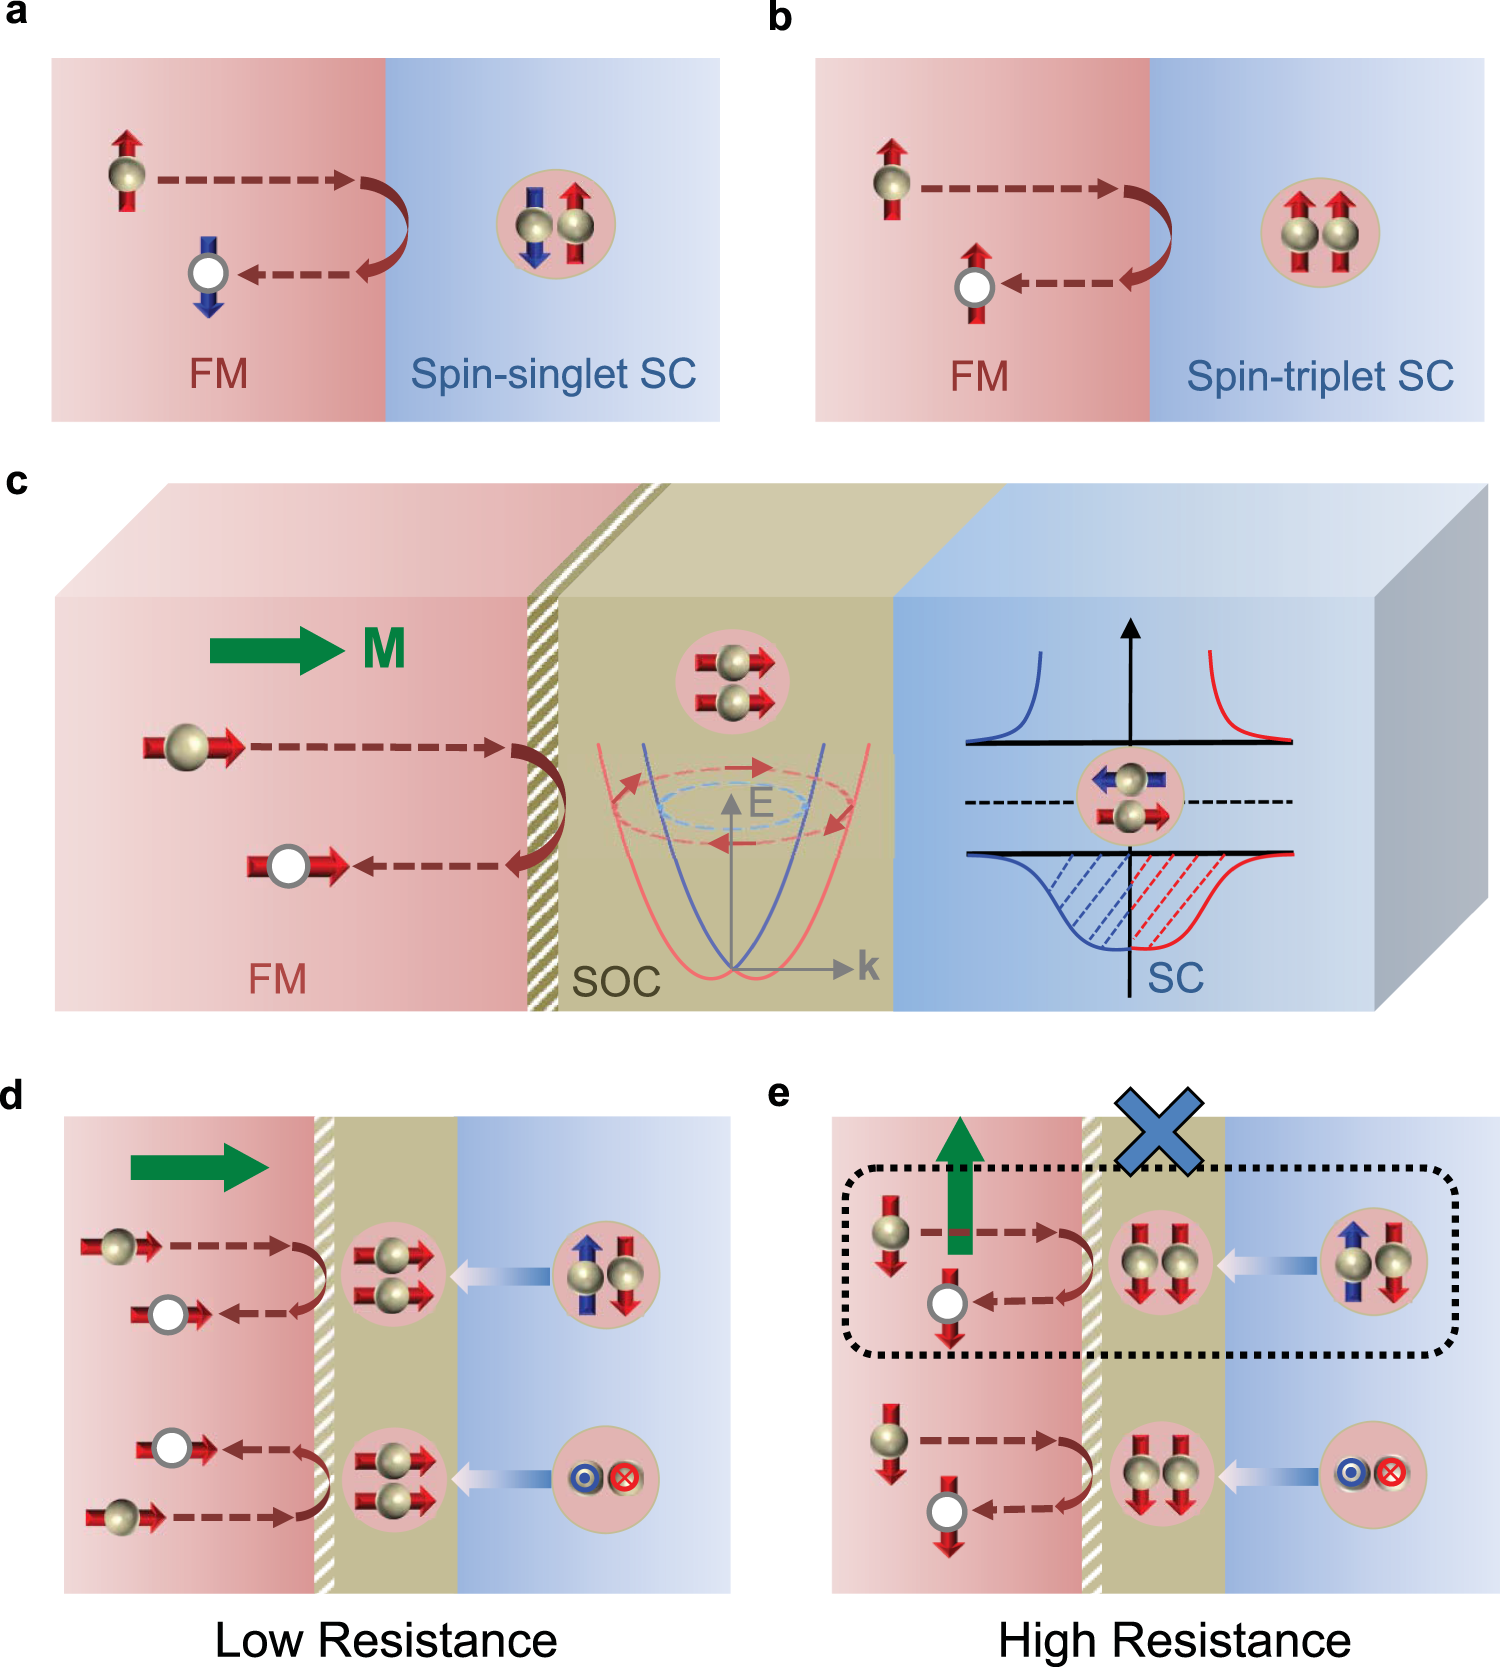 Evidence for anisotropic spin-triplet Andreev reflection at the 2D van der  Waals ferromagnet/superconductor interface